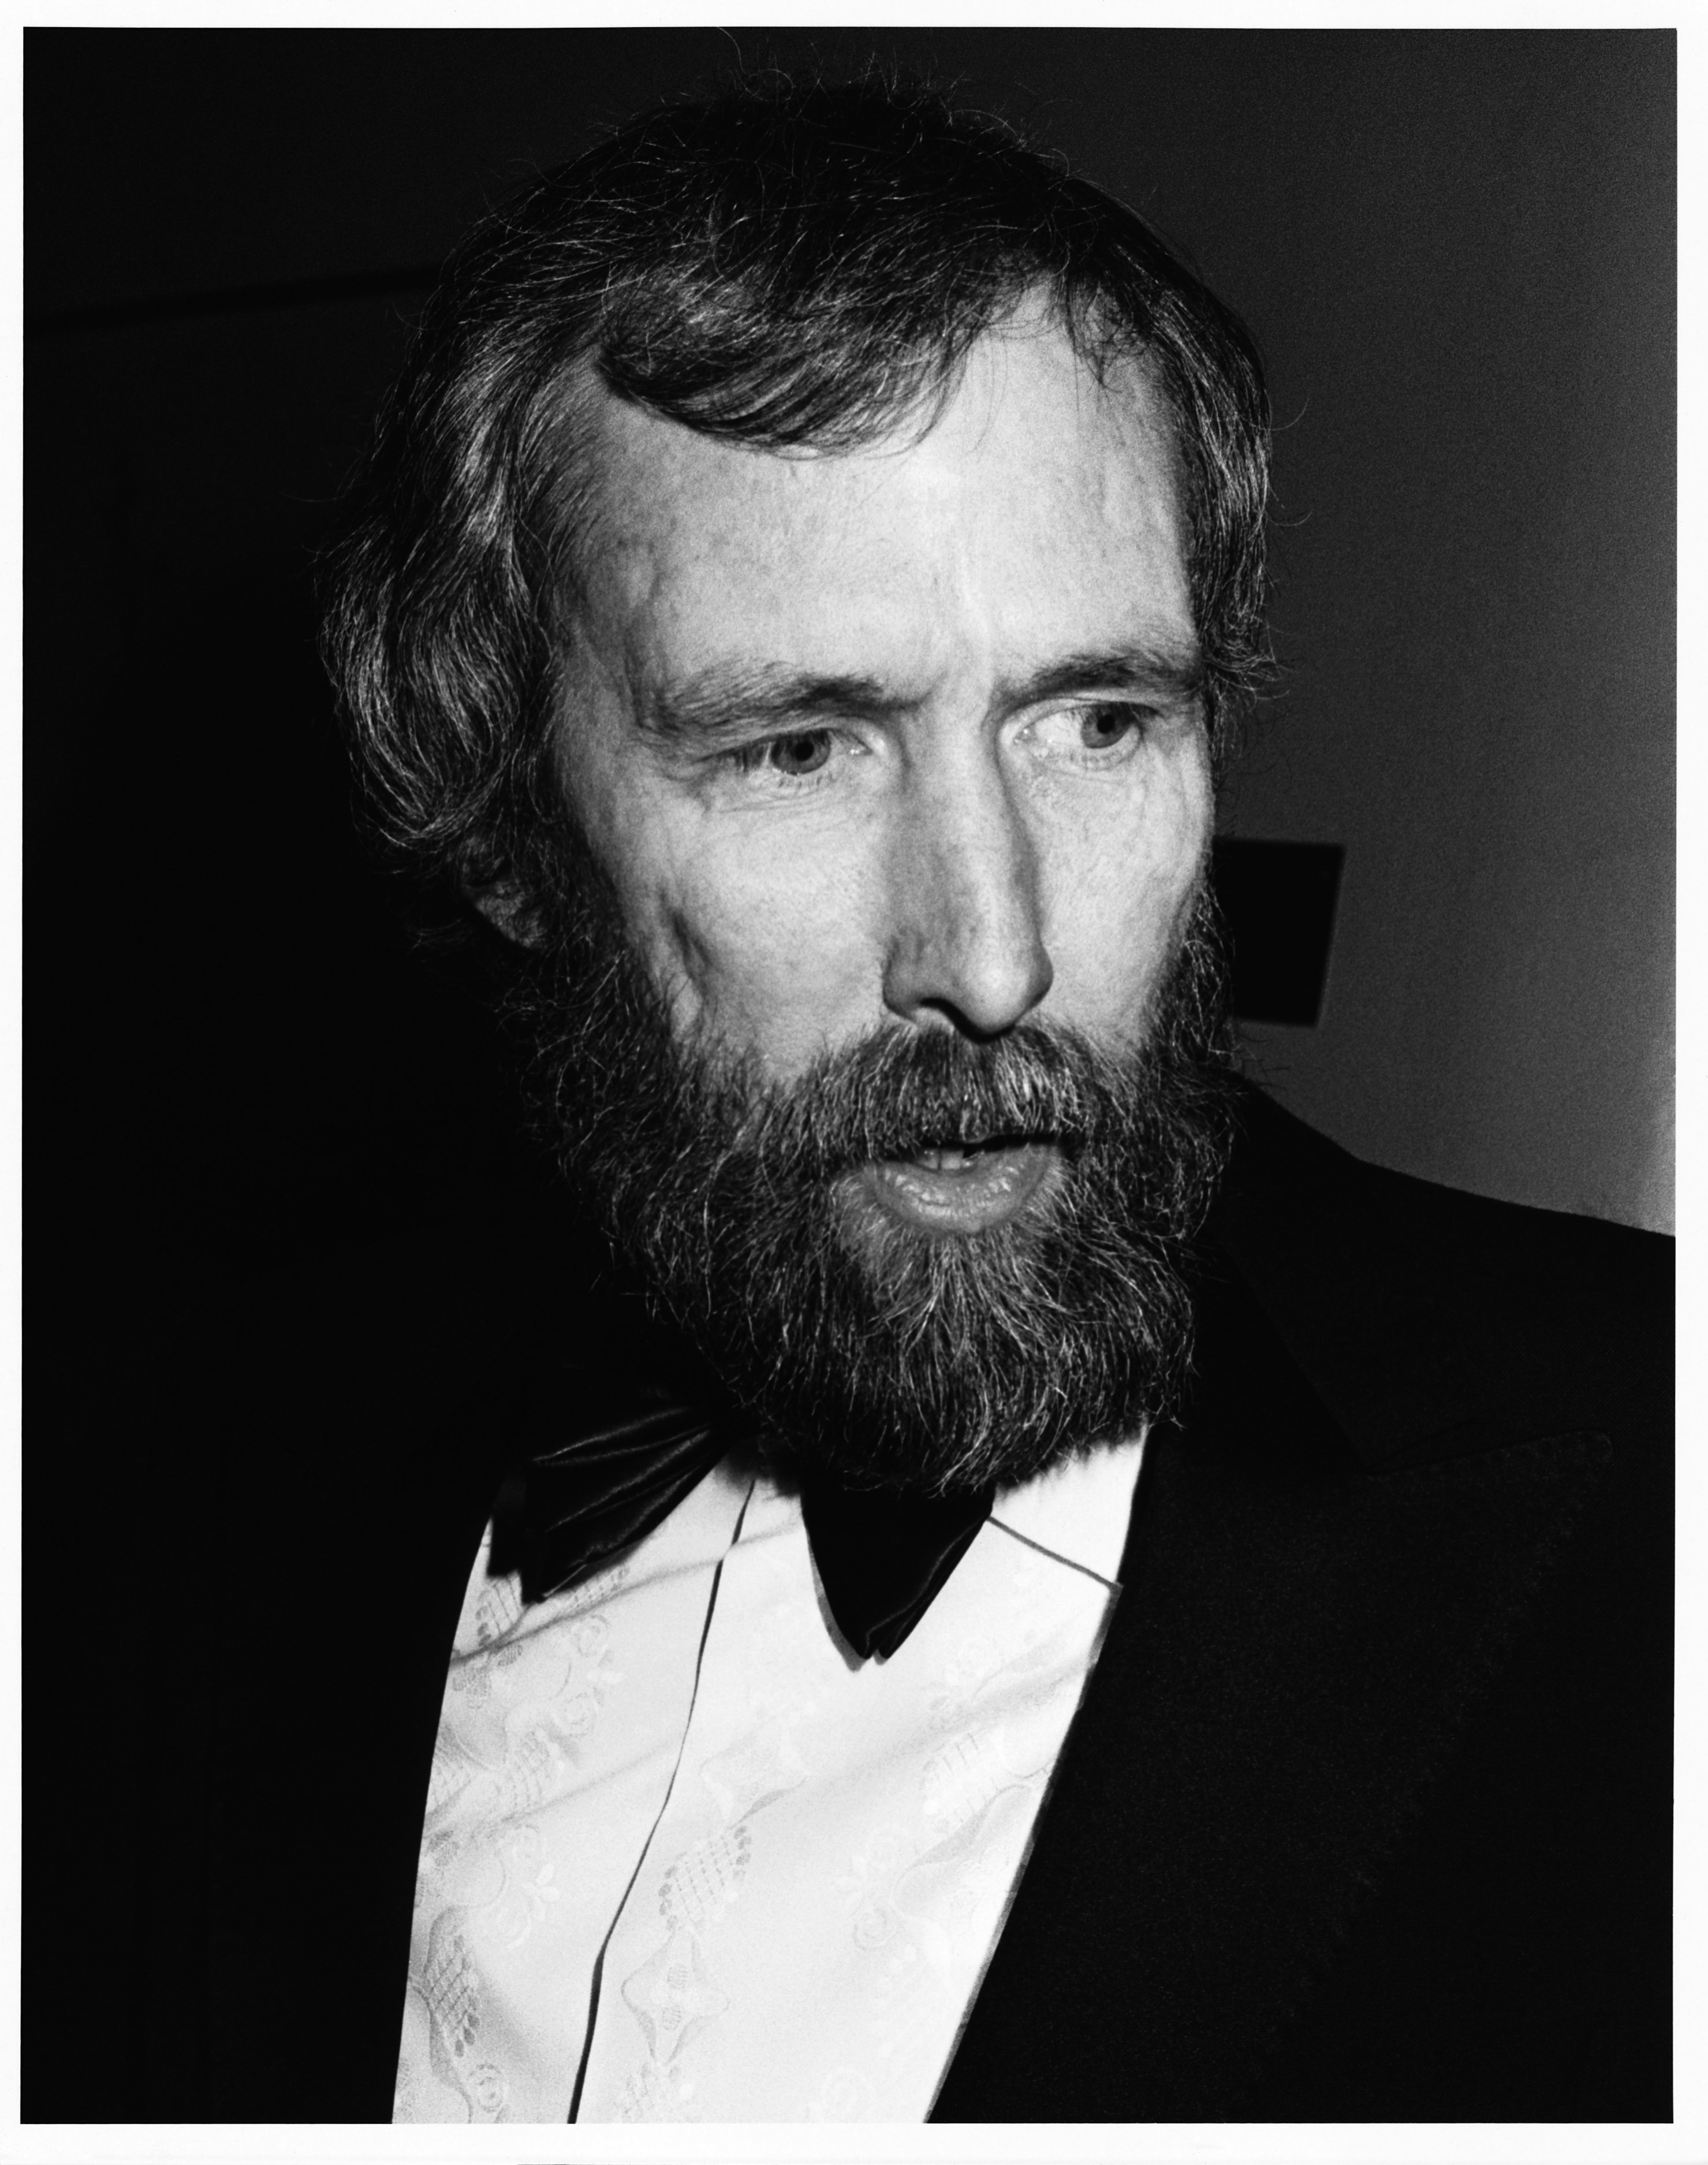 Jim Henson (1936-1990), the American puppeteer and creator of the the "Muppets" and Sesame Street attends the 1985 British Academy of Film and Television Arts (BAFTA) award ceremony. Source: Getty Images